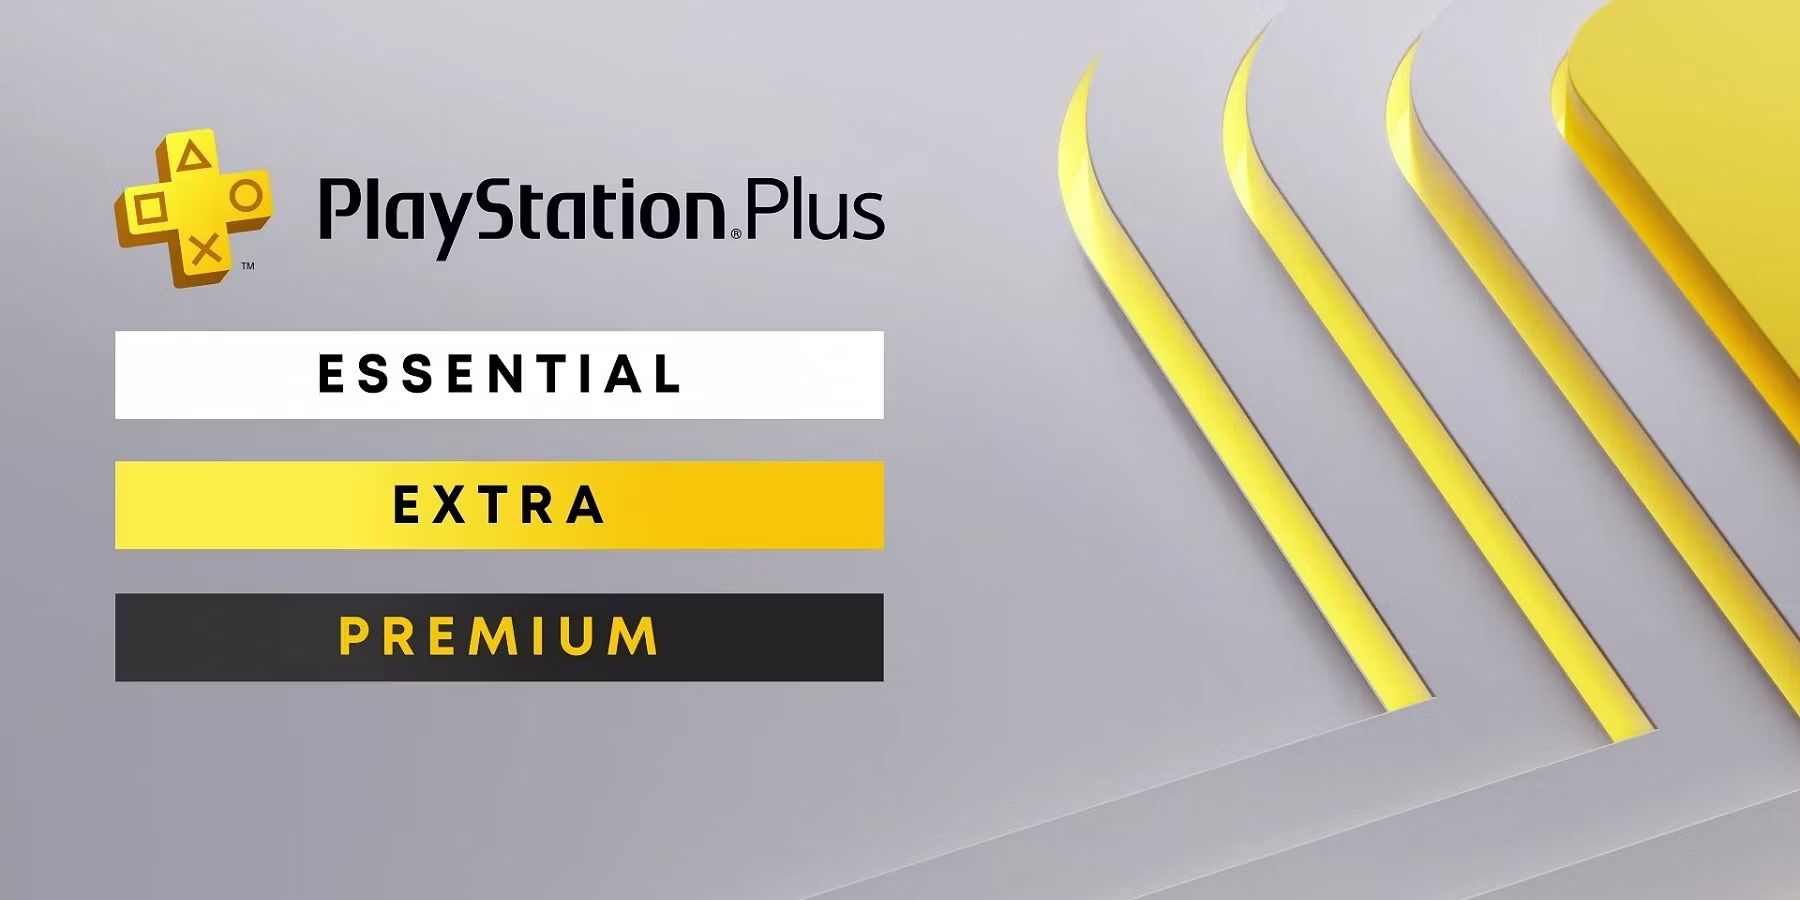 PlayStation Plus 30 Day (CA), PS Plus card cheaper